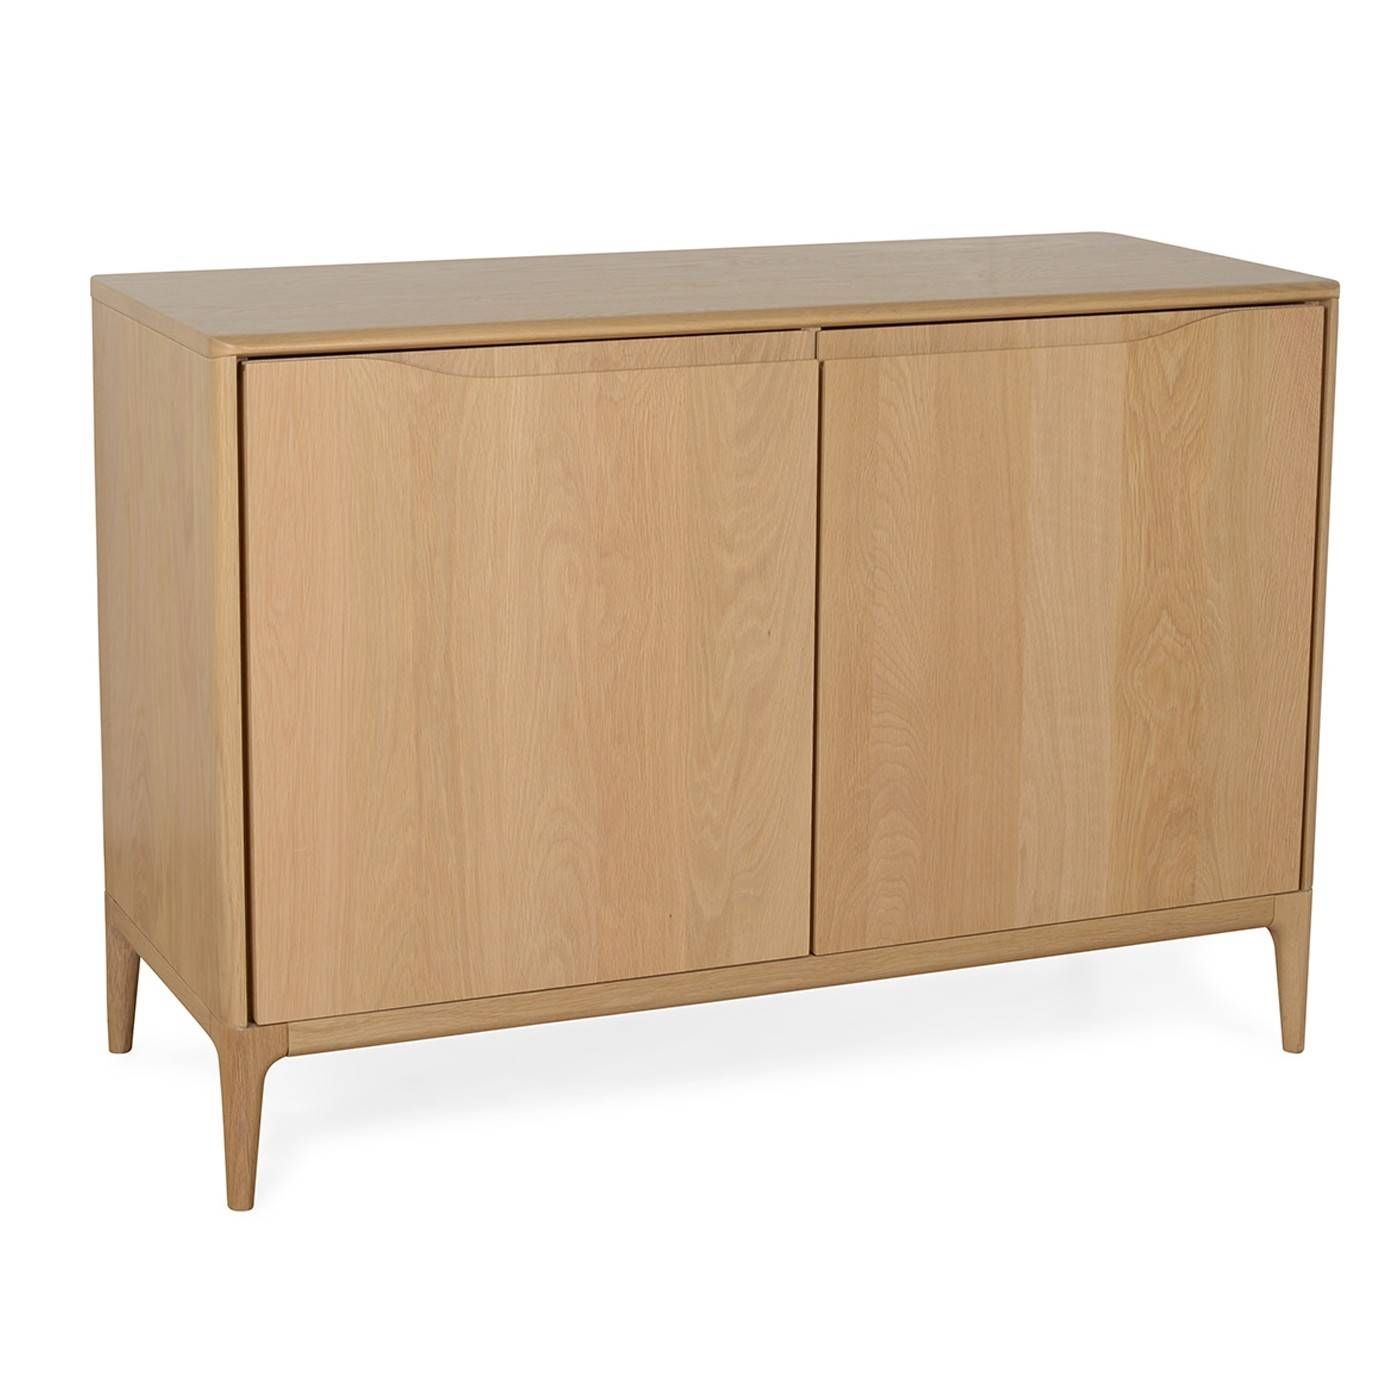 Light Wood Sideboards | Designer Contemporary Sideboards | Heal's Intended For Light Wood Sideboards (View 2 of 30)